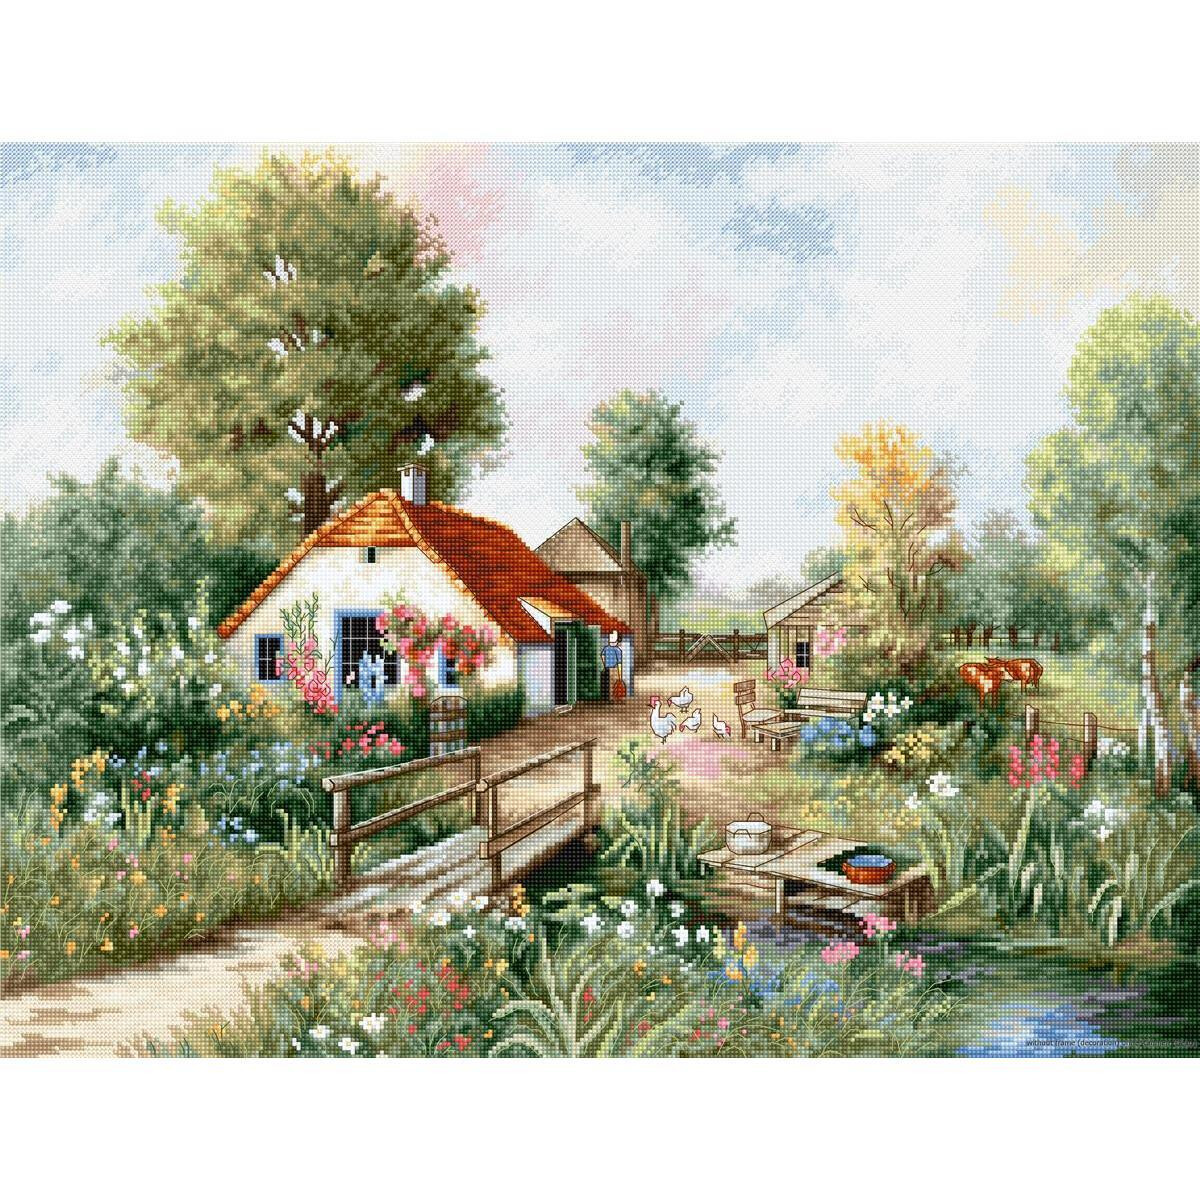 An enchanting rural scene shows a picturesque cottage...